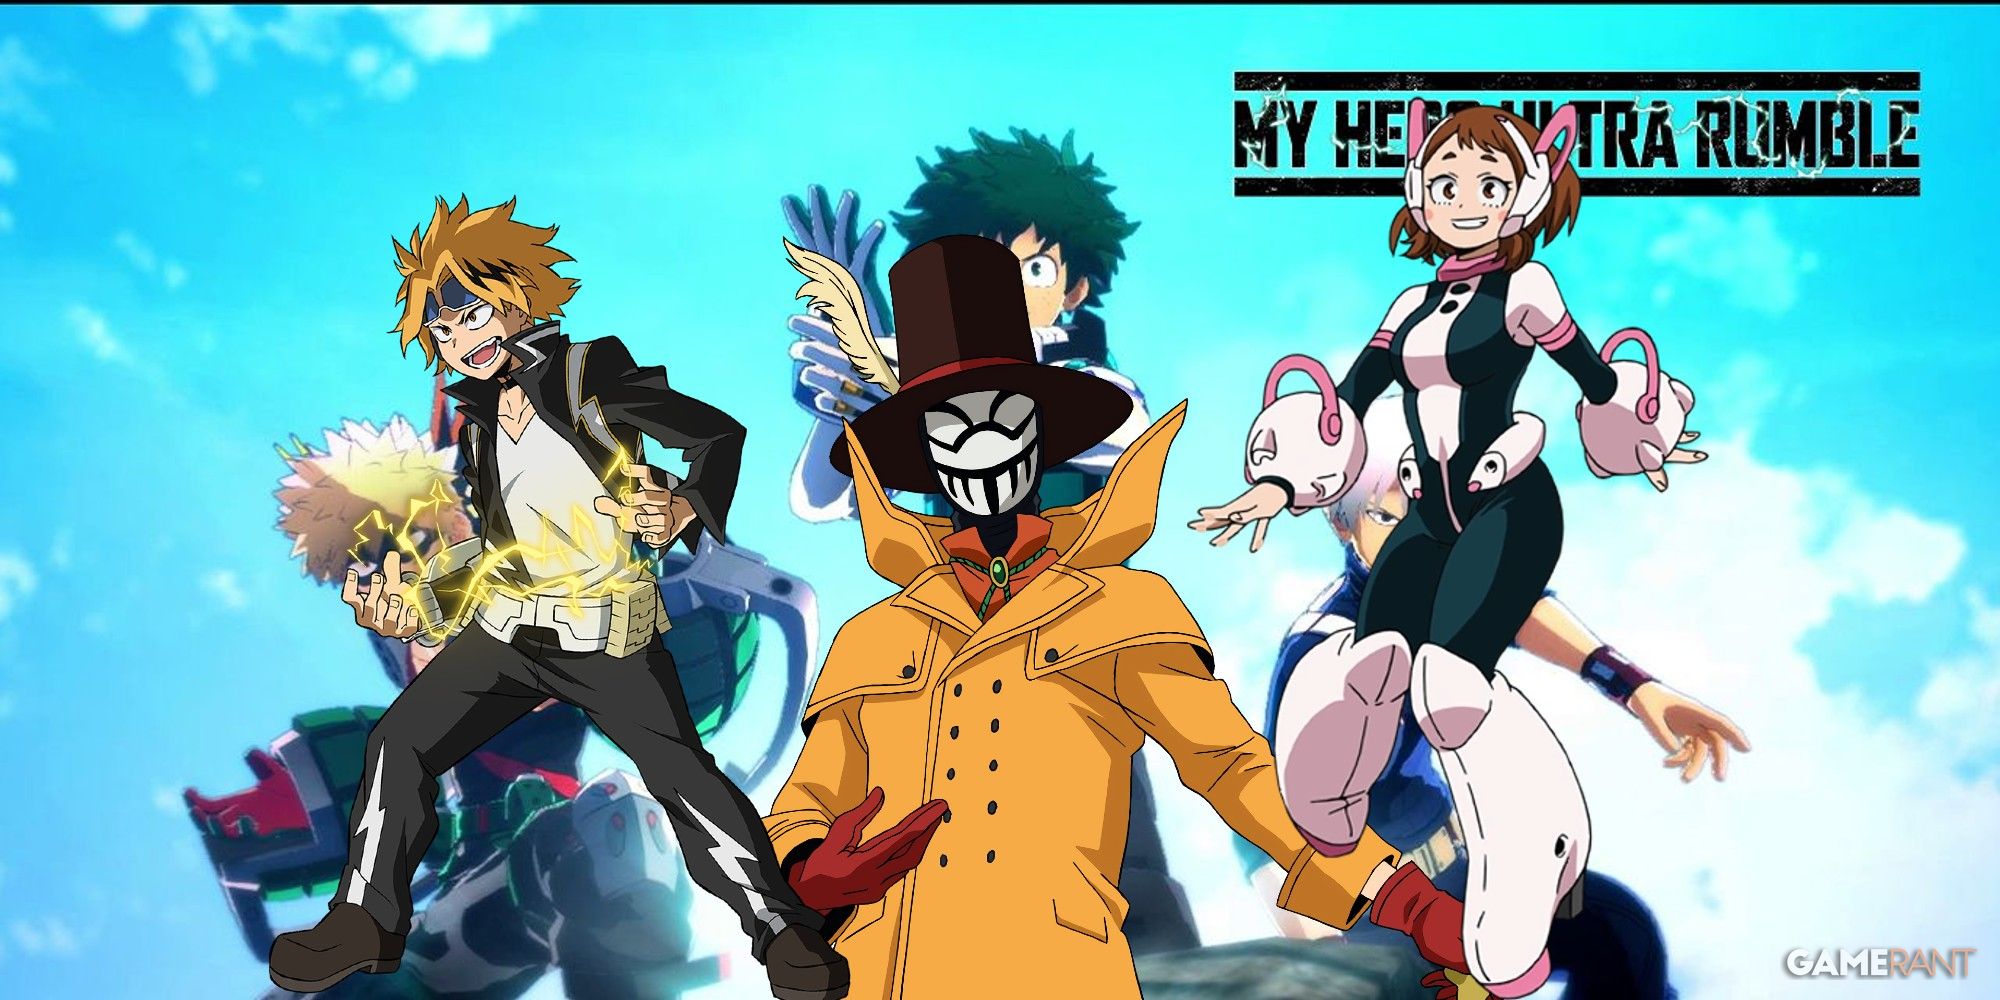 Denki, Mr. Compress, and Ochaco in front of the my hero ultra rumble cover